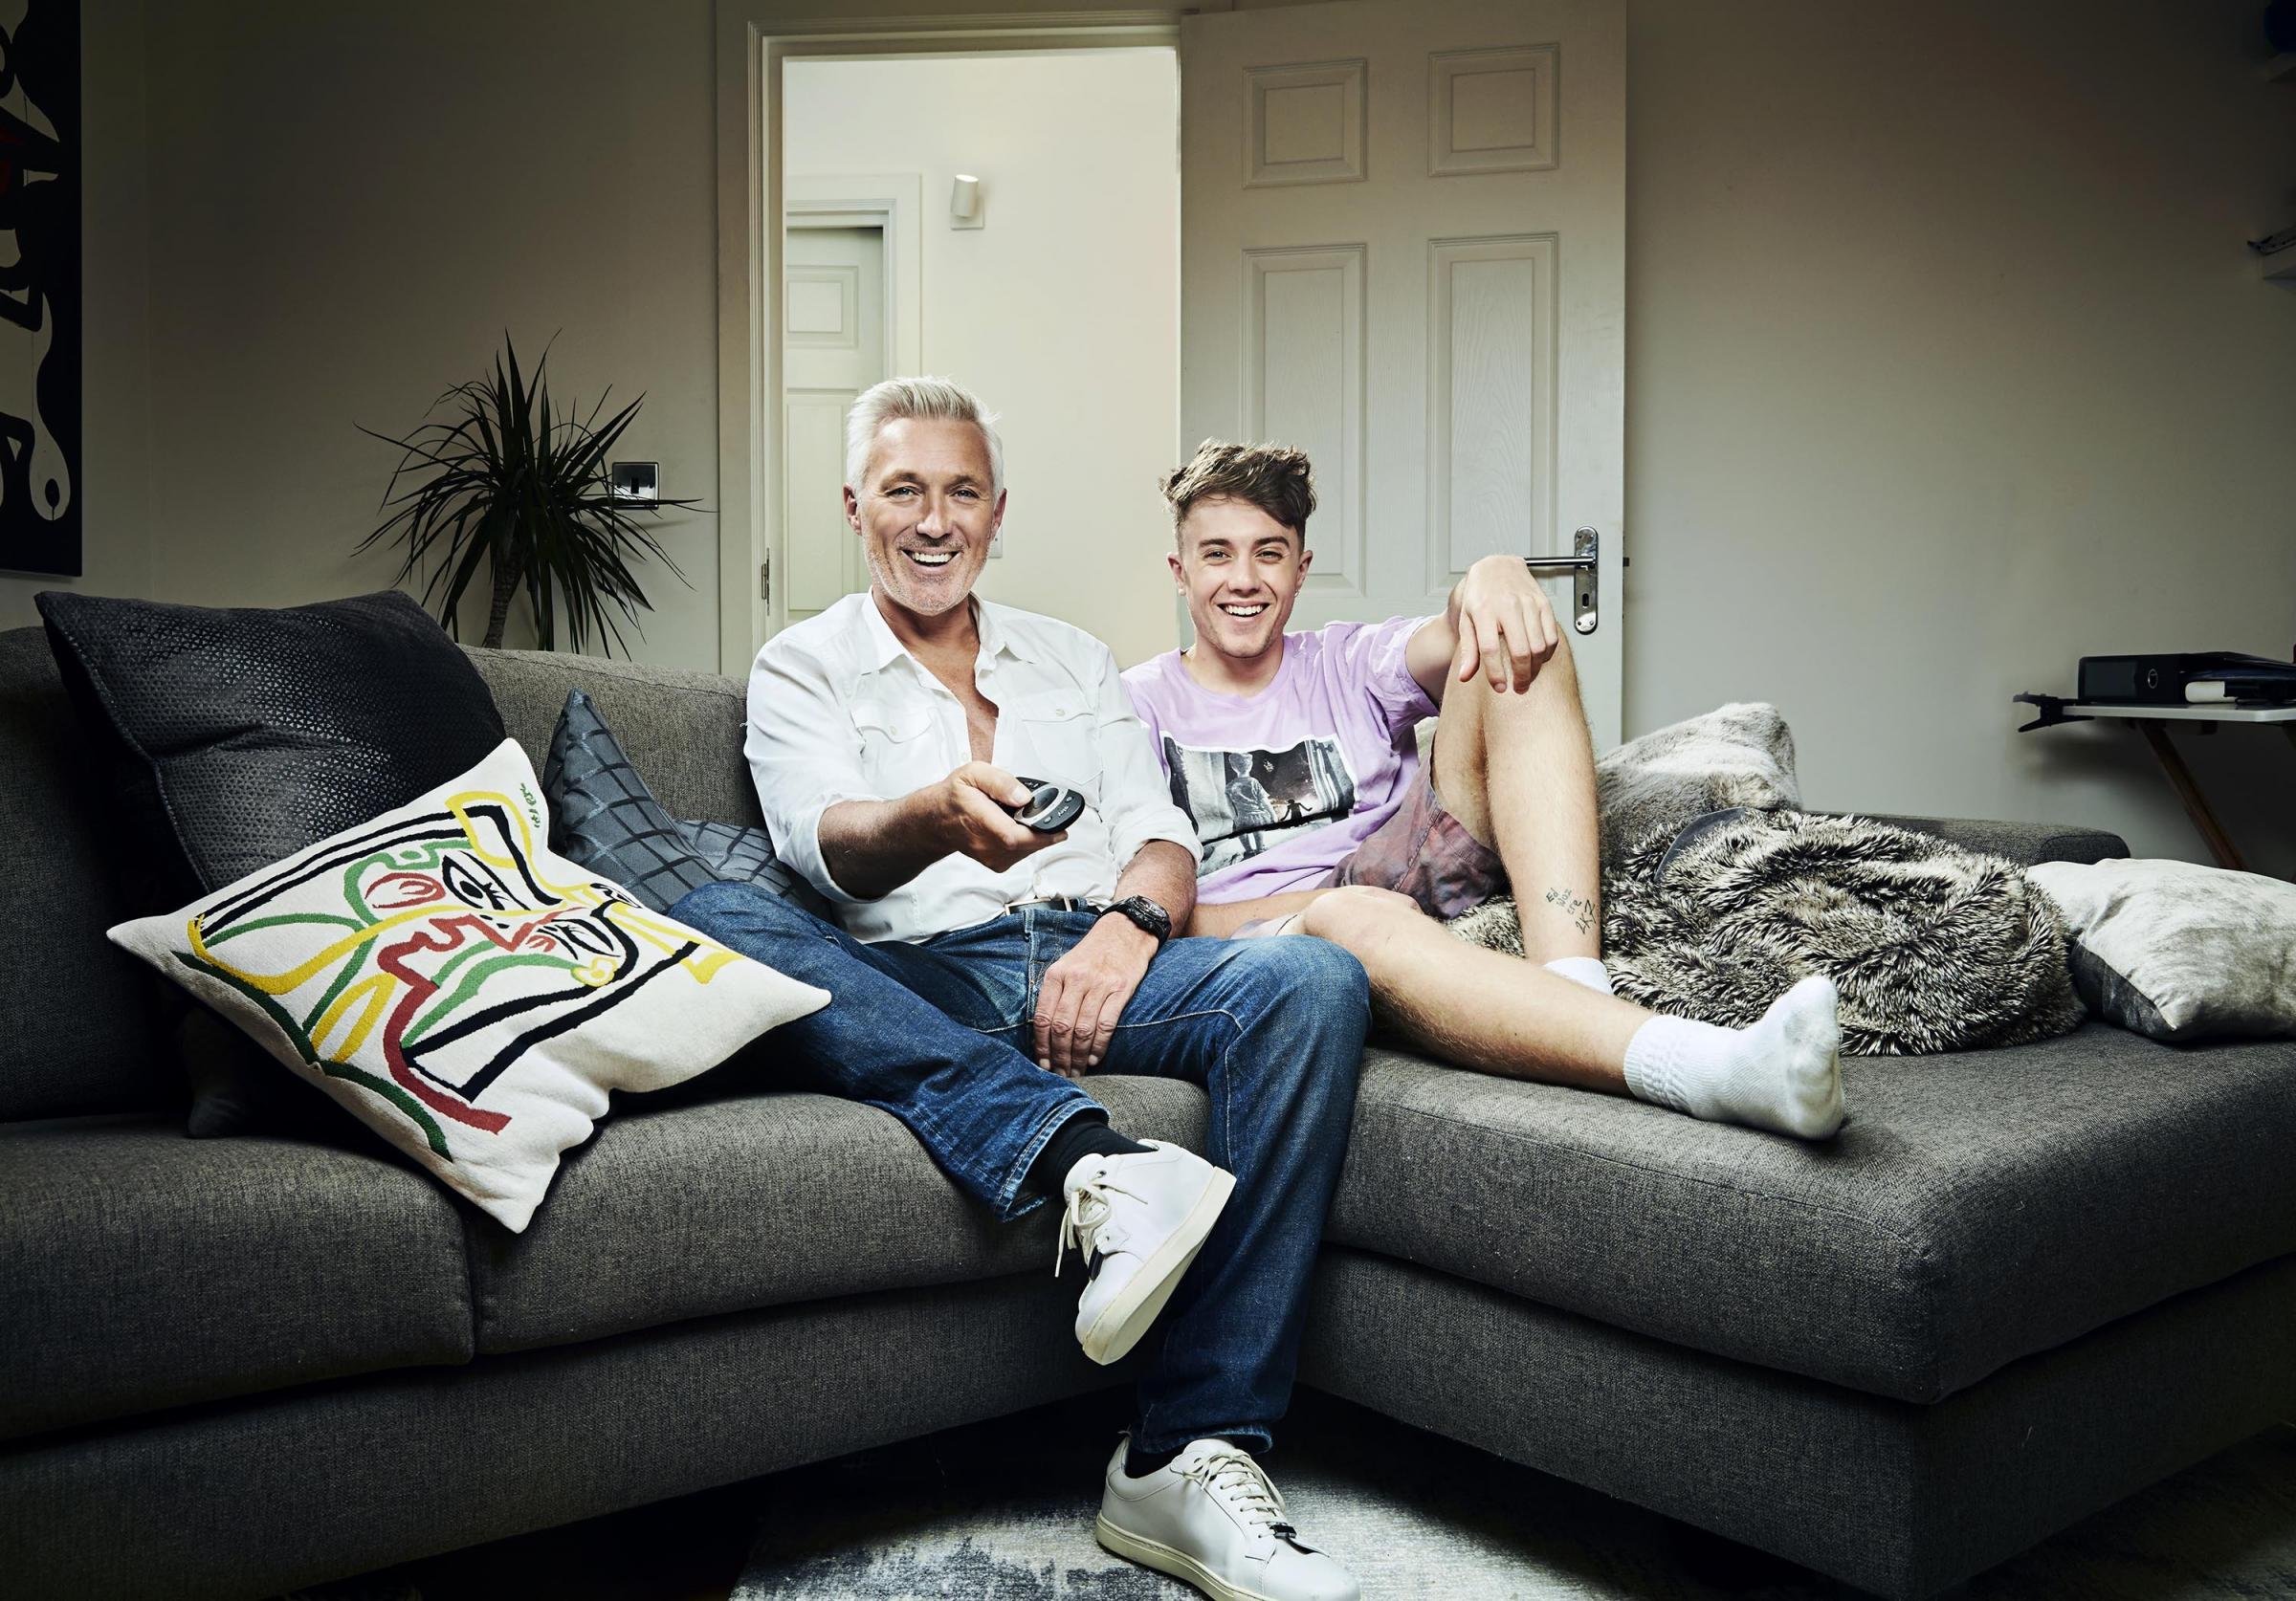 Roman Kemp says you will get to see his dad on Googlebox not the celebrity